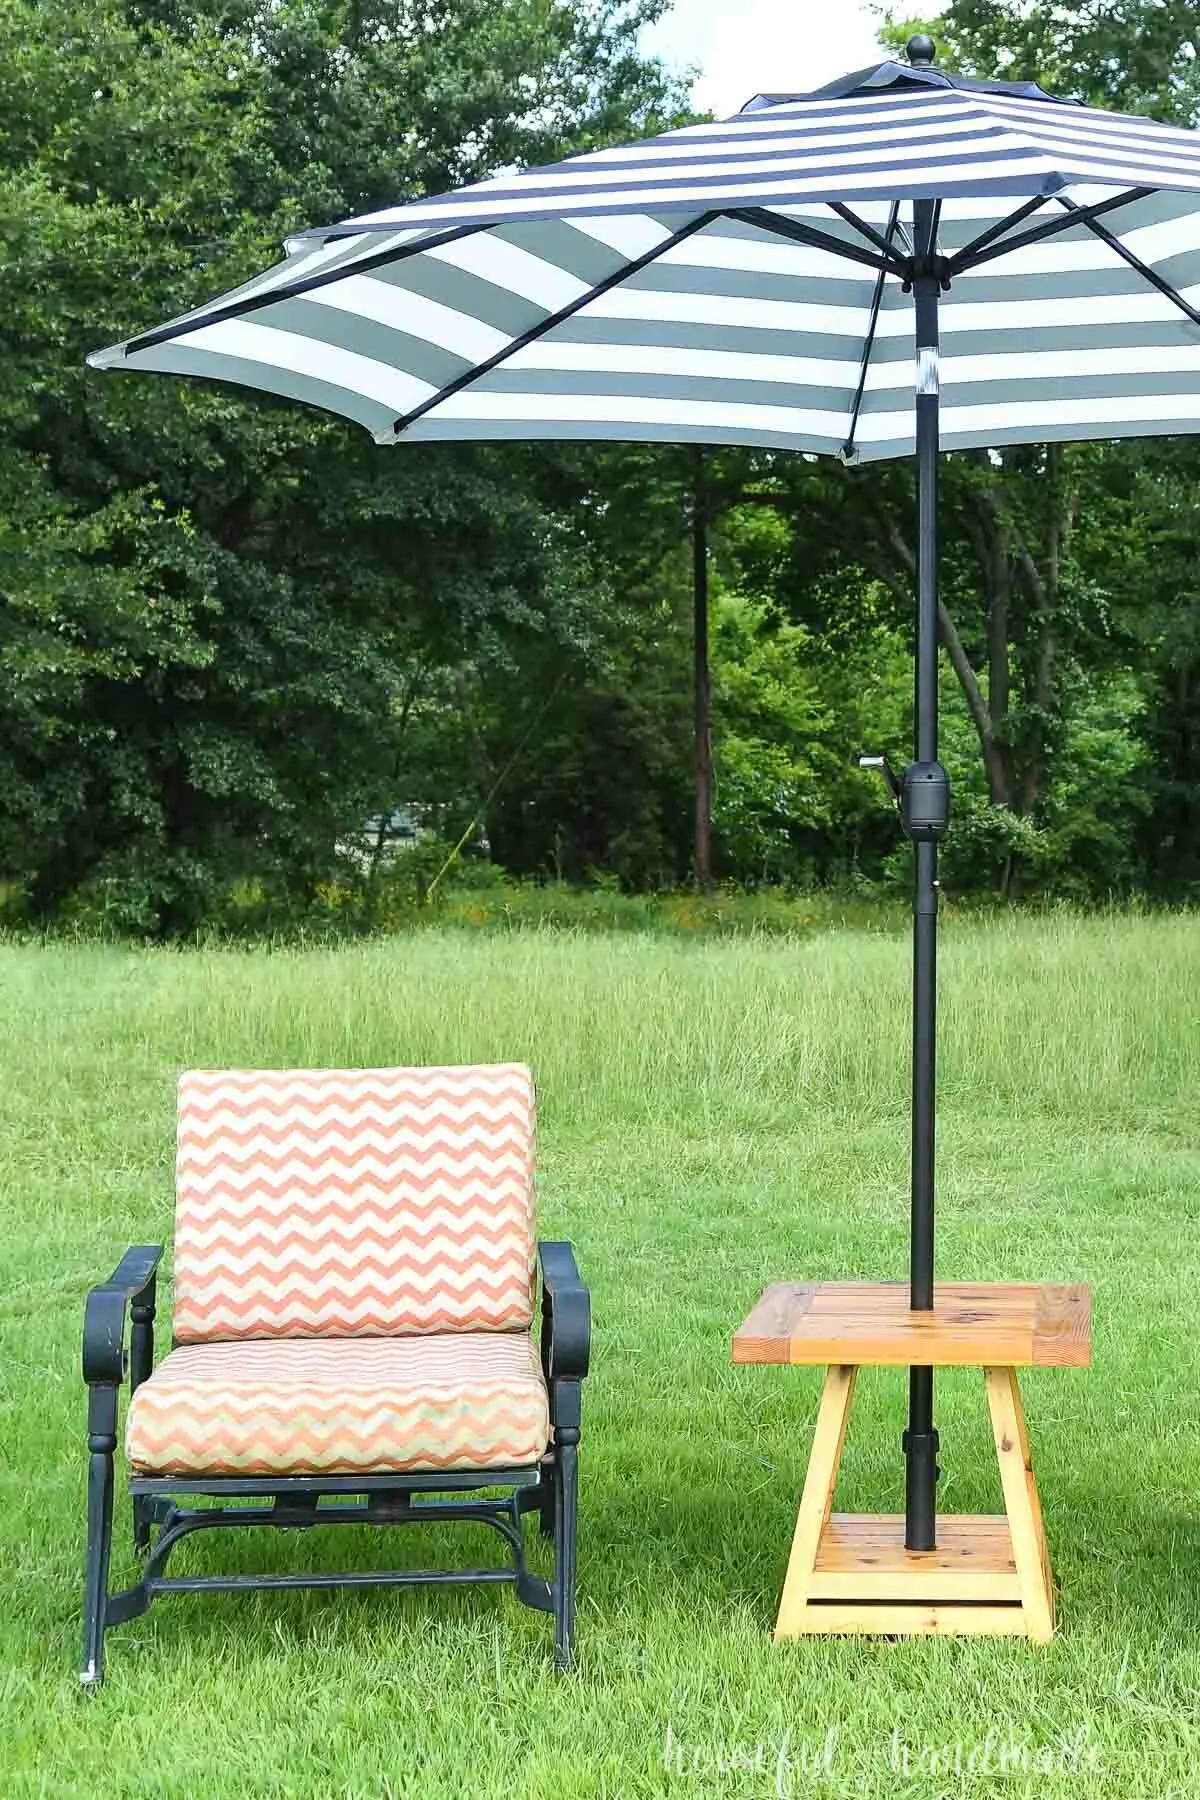 Umbrella side table set up on the lawn next to an orange and white cushioned chair. 